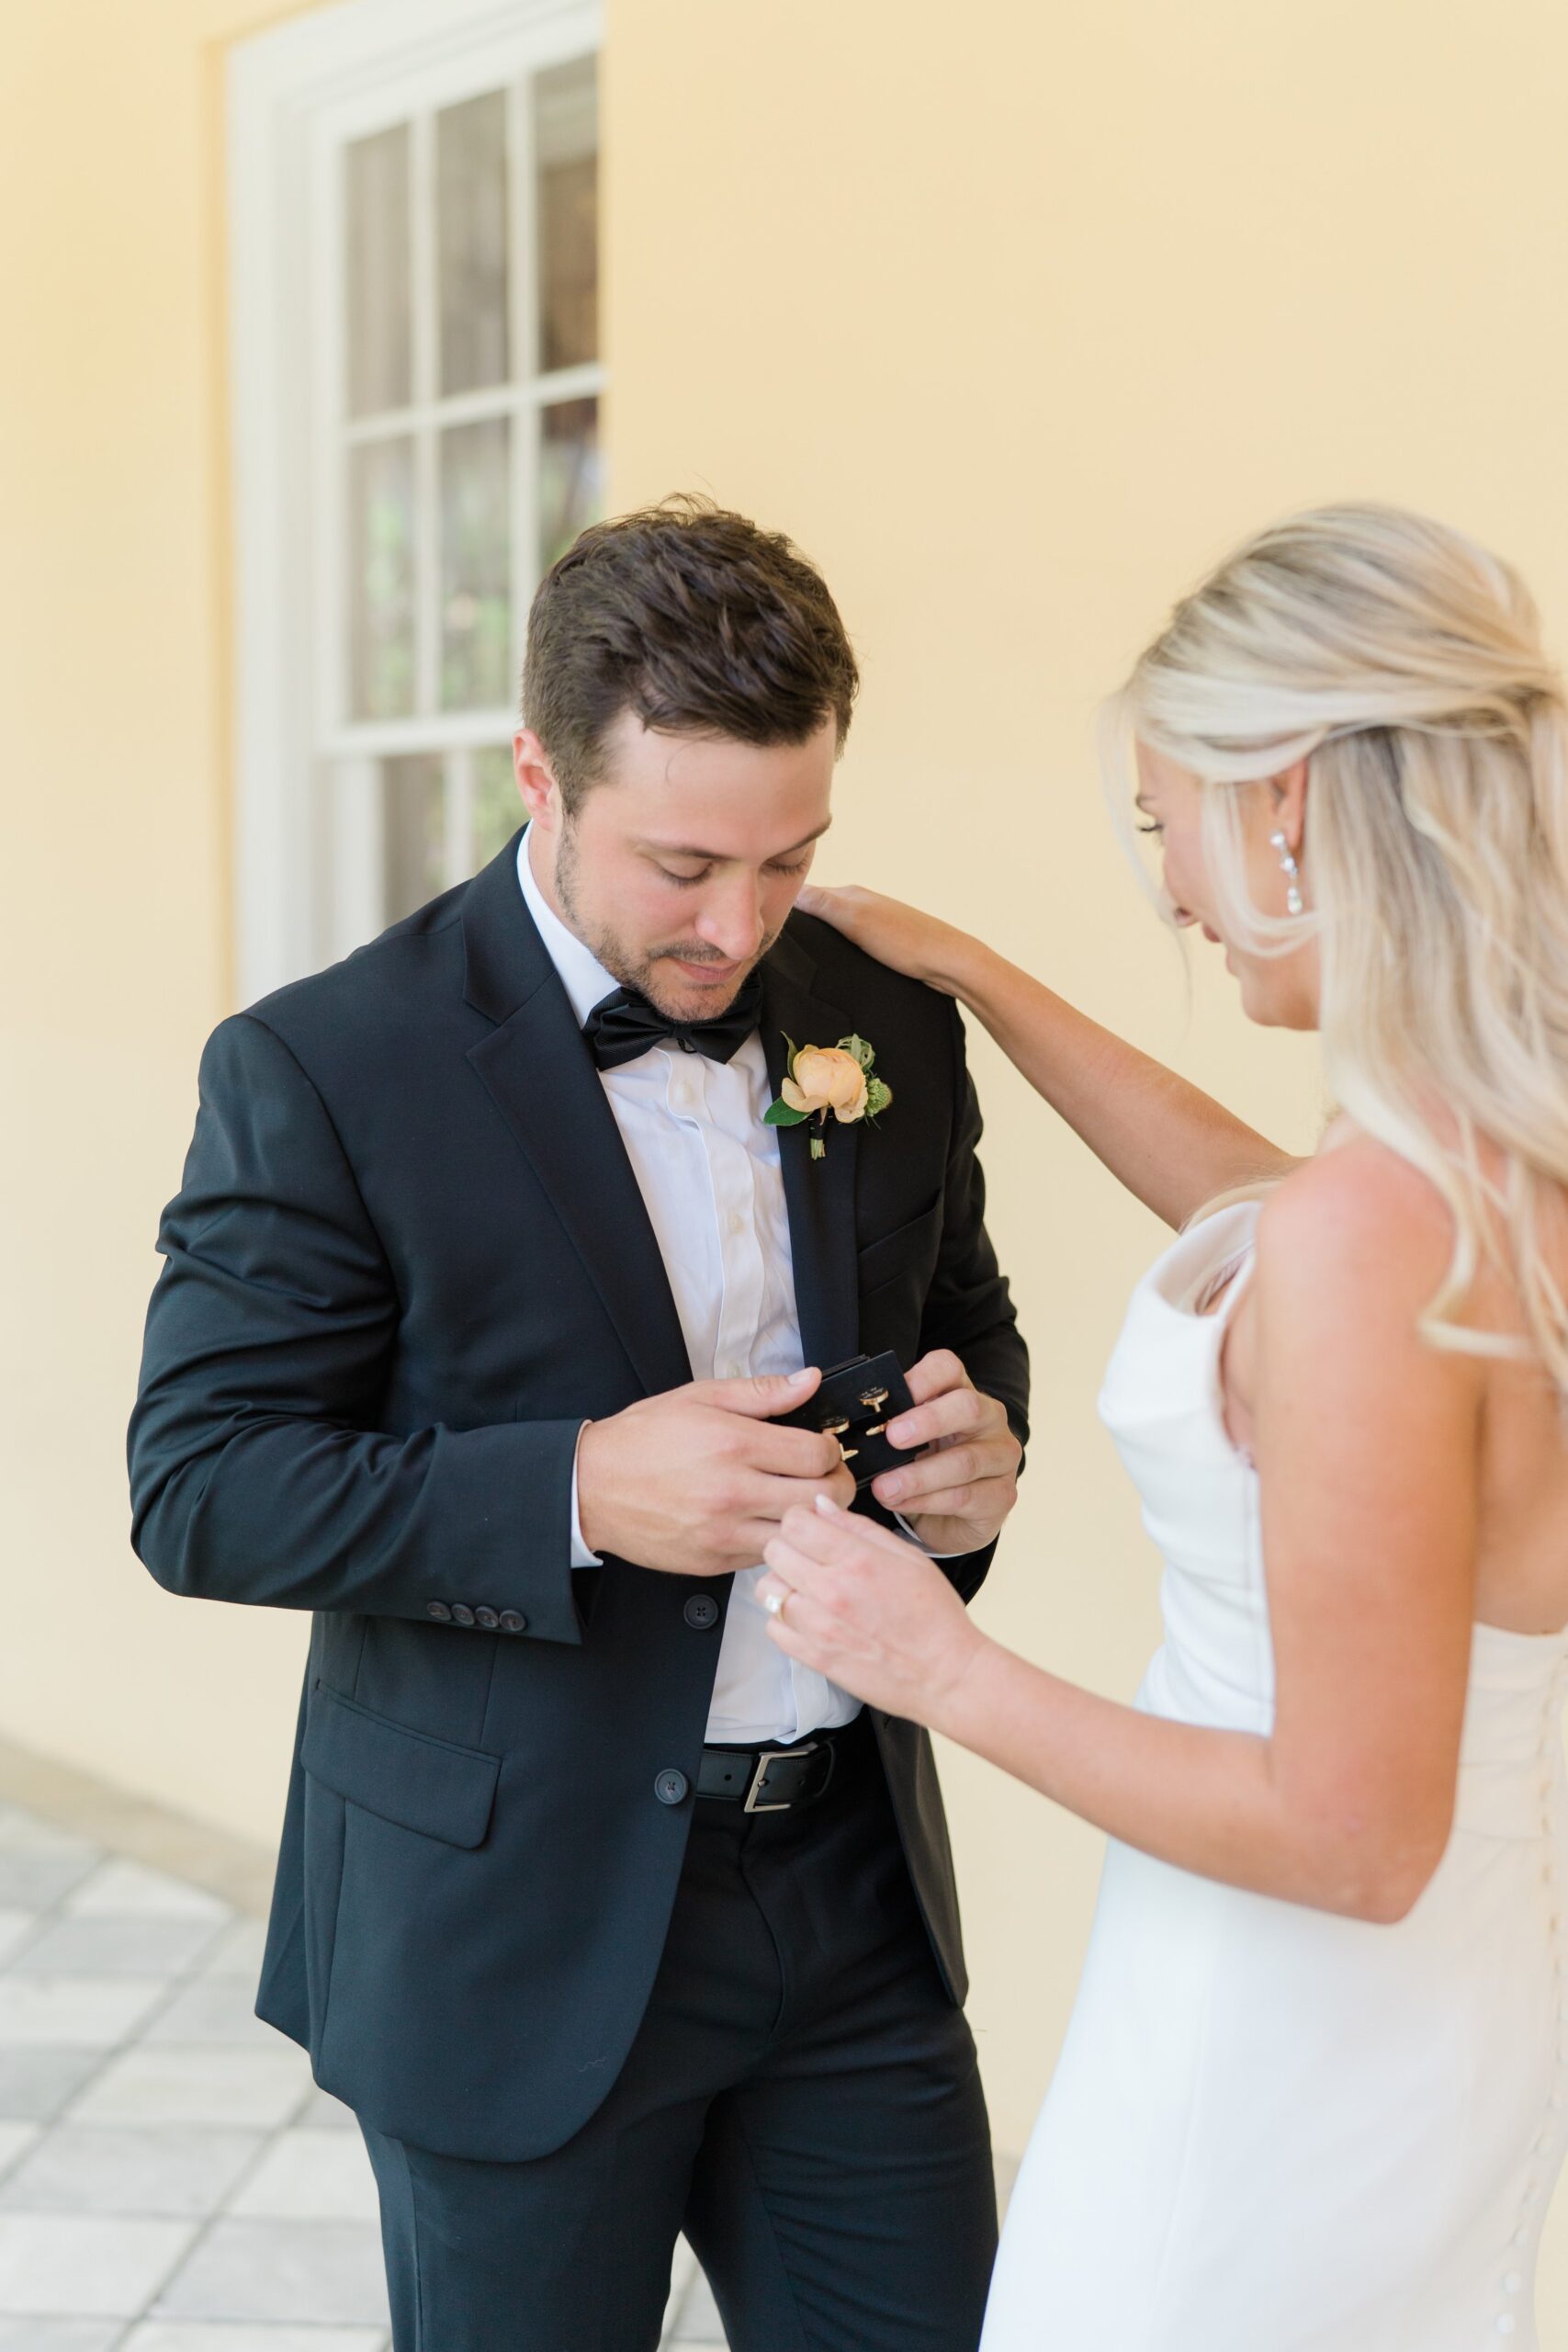 groom sees gift from bride for the first time.